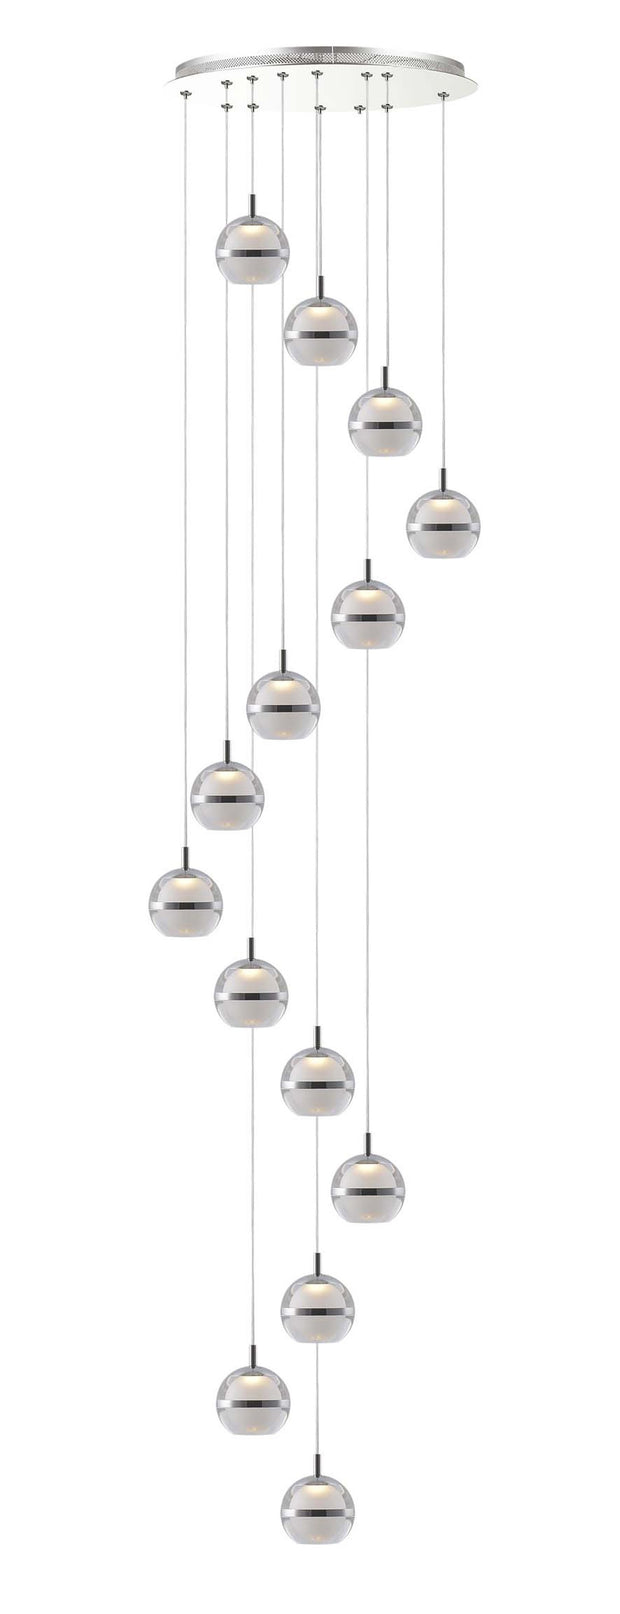 Everly Polished Chrome 14 Light Led Cluster Stairway Pendant - 3000K